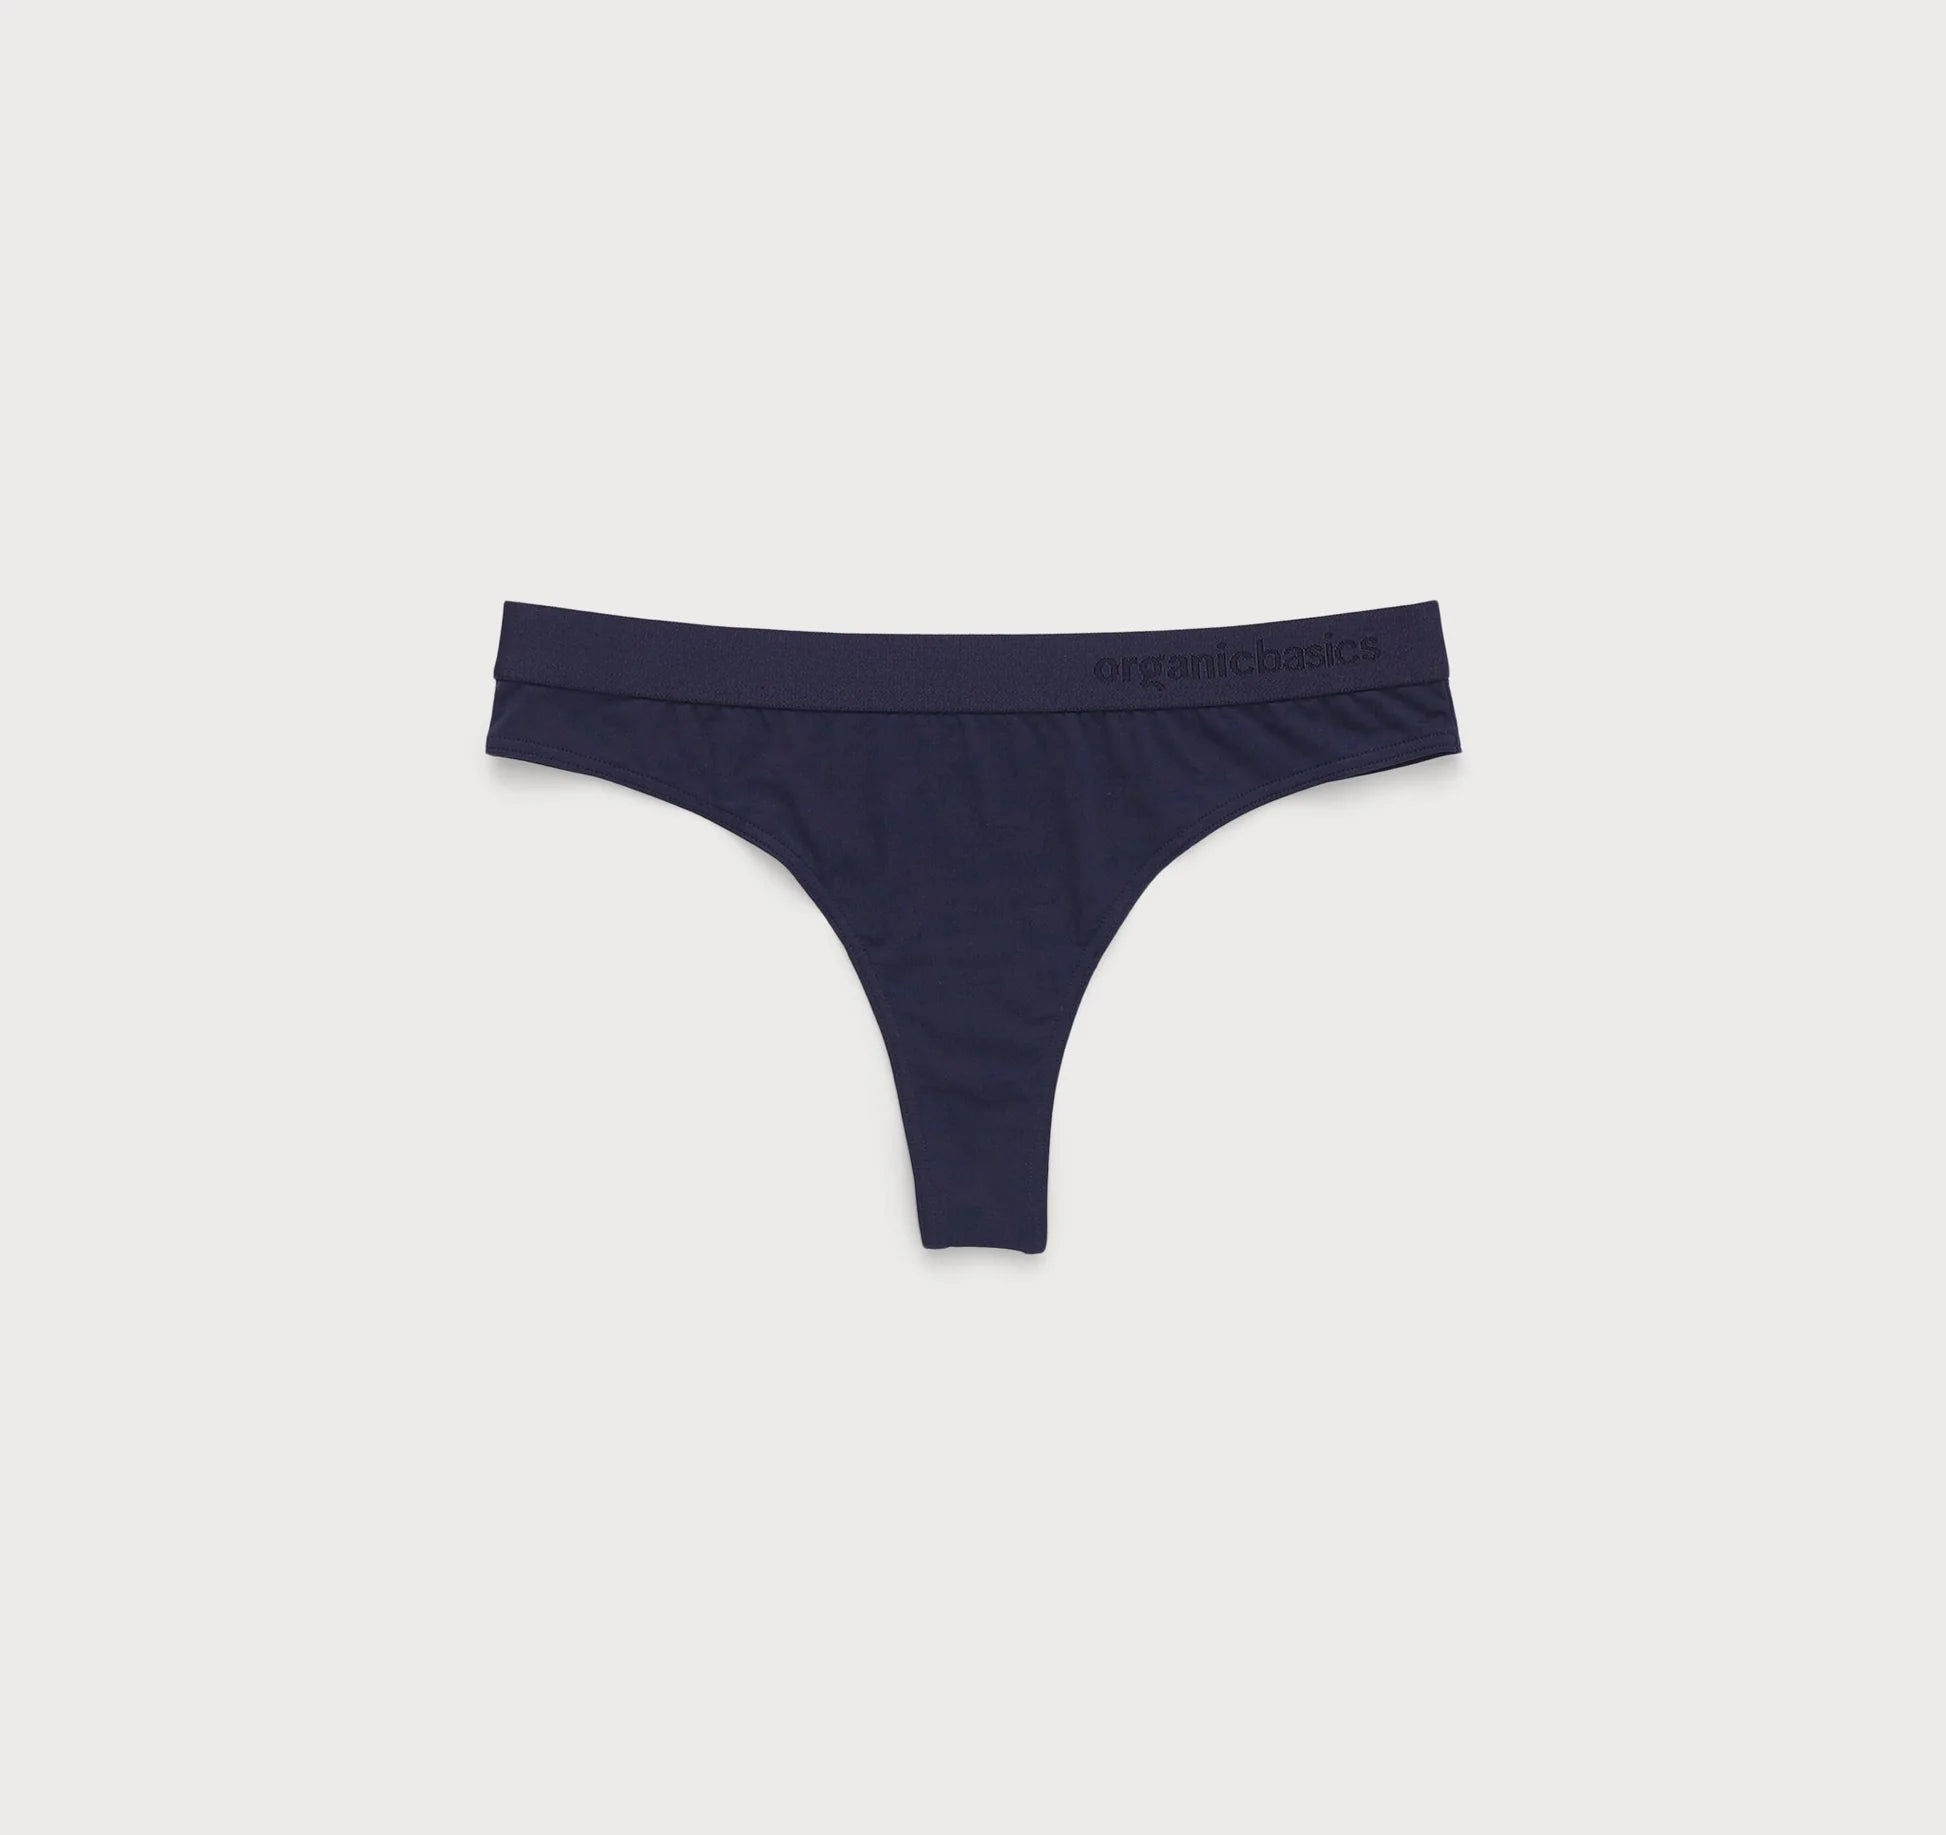 A sustainable pair of Soft Touch Tanga 2-Pack - Navy thongs on a white background by Organic Basics.